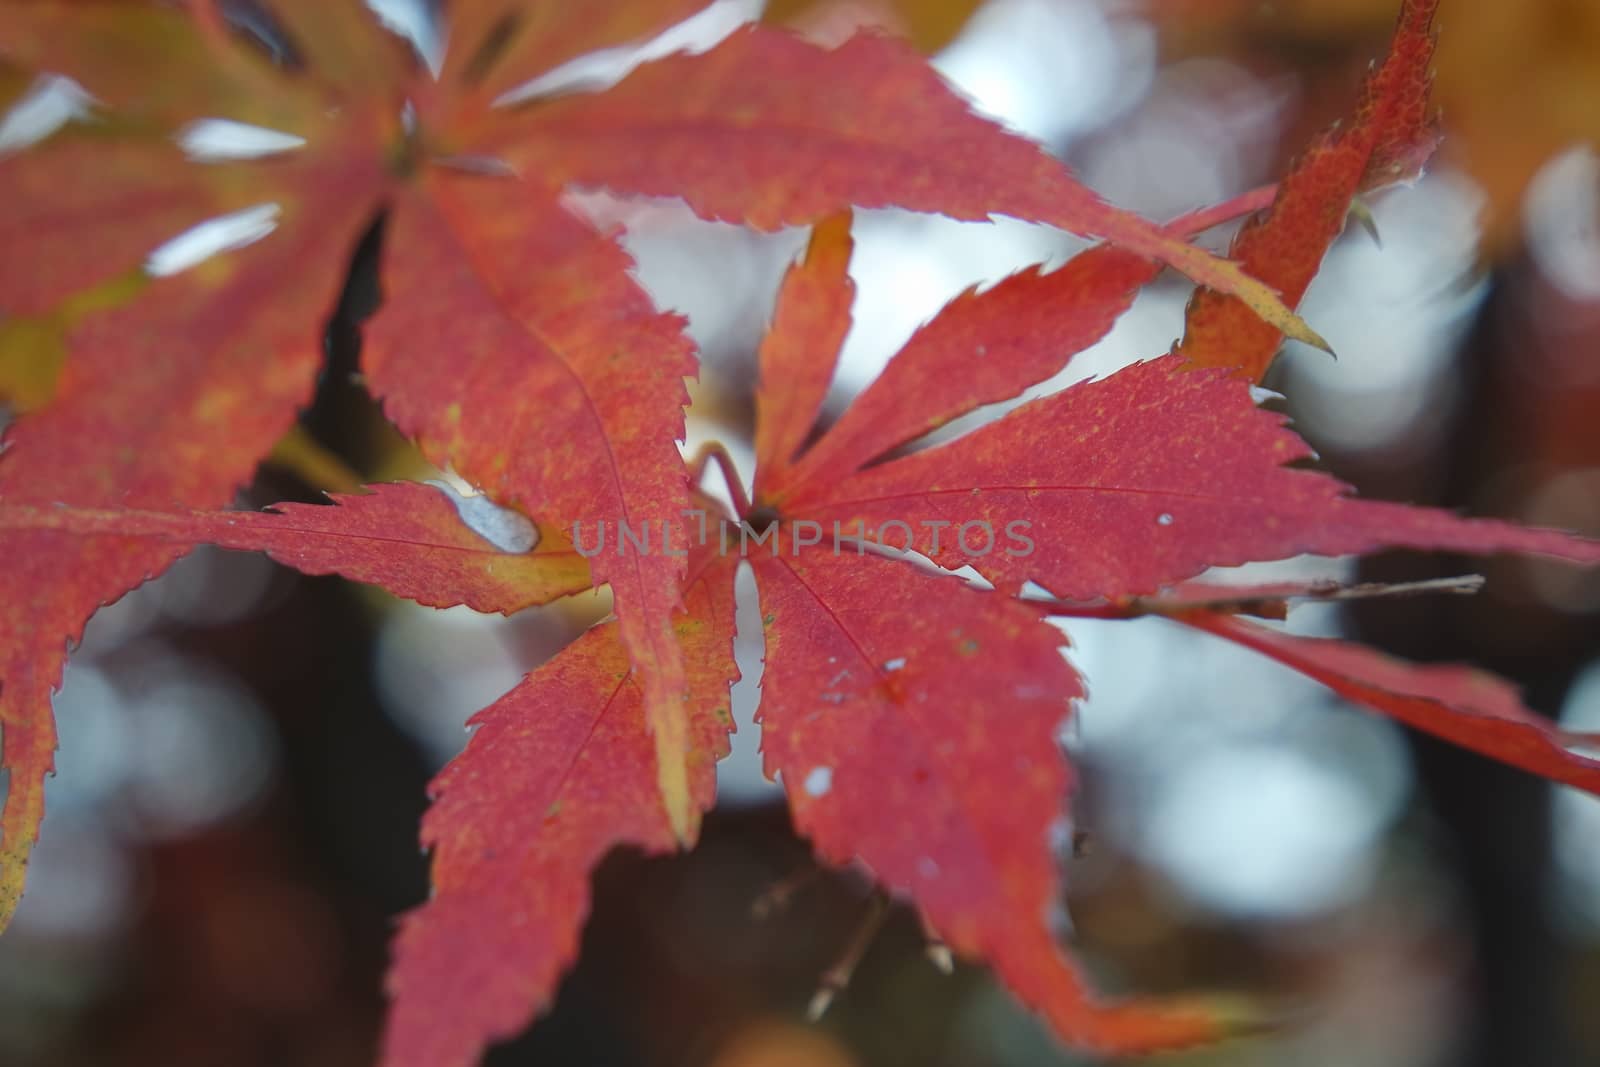 Closeup view of colorful vibrant leaves in fall season during autumn by Photochowk